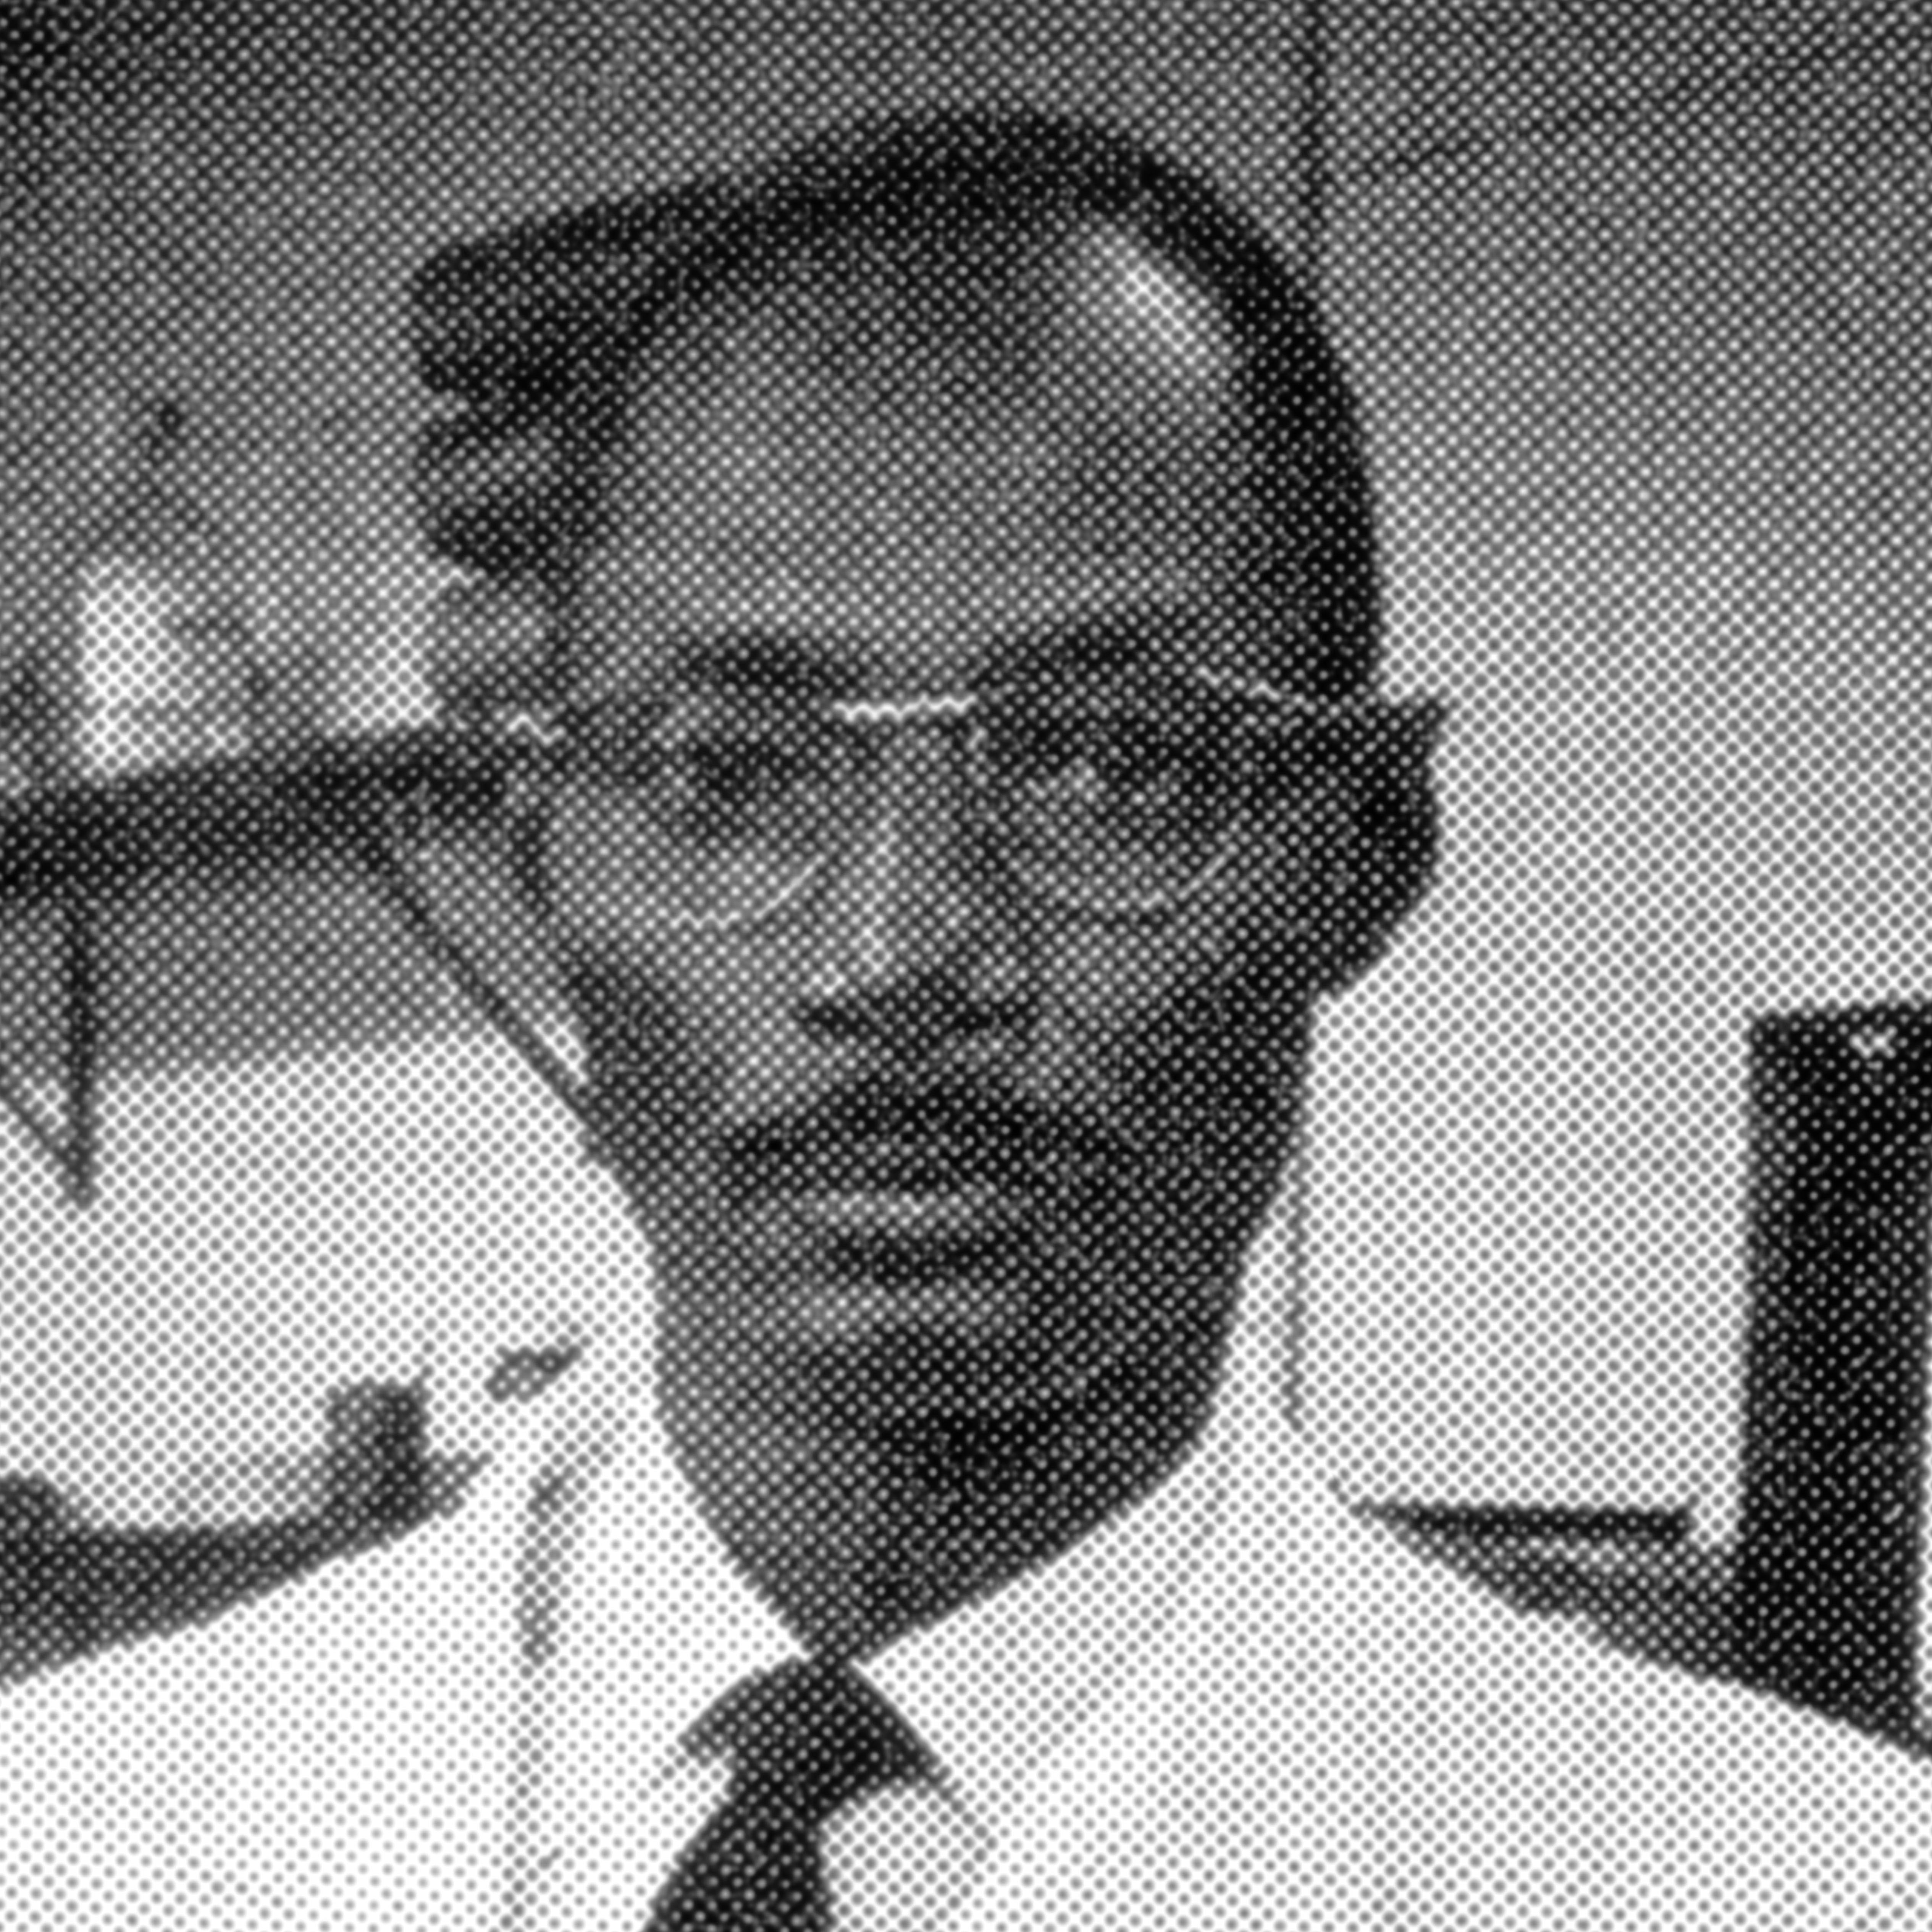 Scan of a photo of George Rusten that was originally printed in the NIH Record. He's wearing glasses in the lab